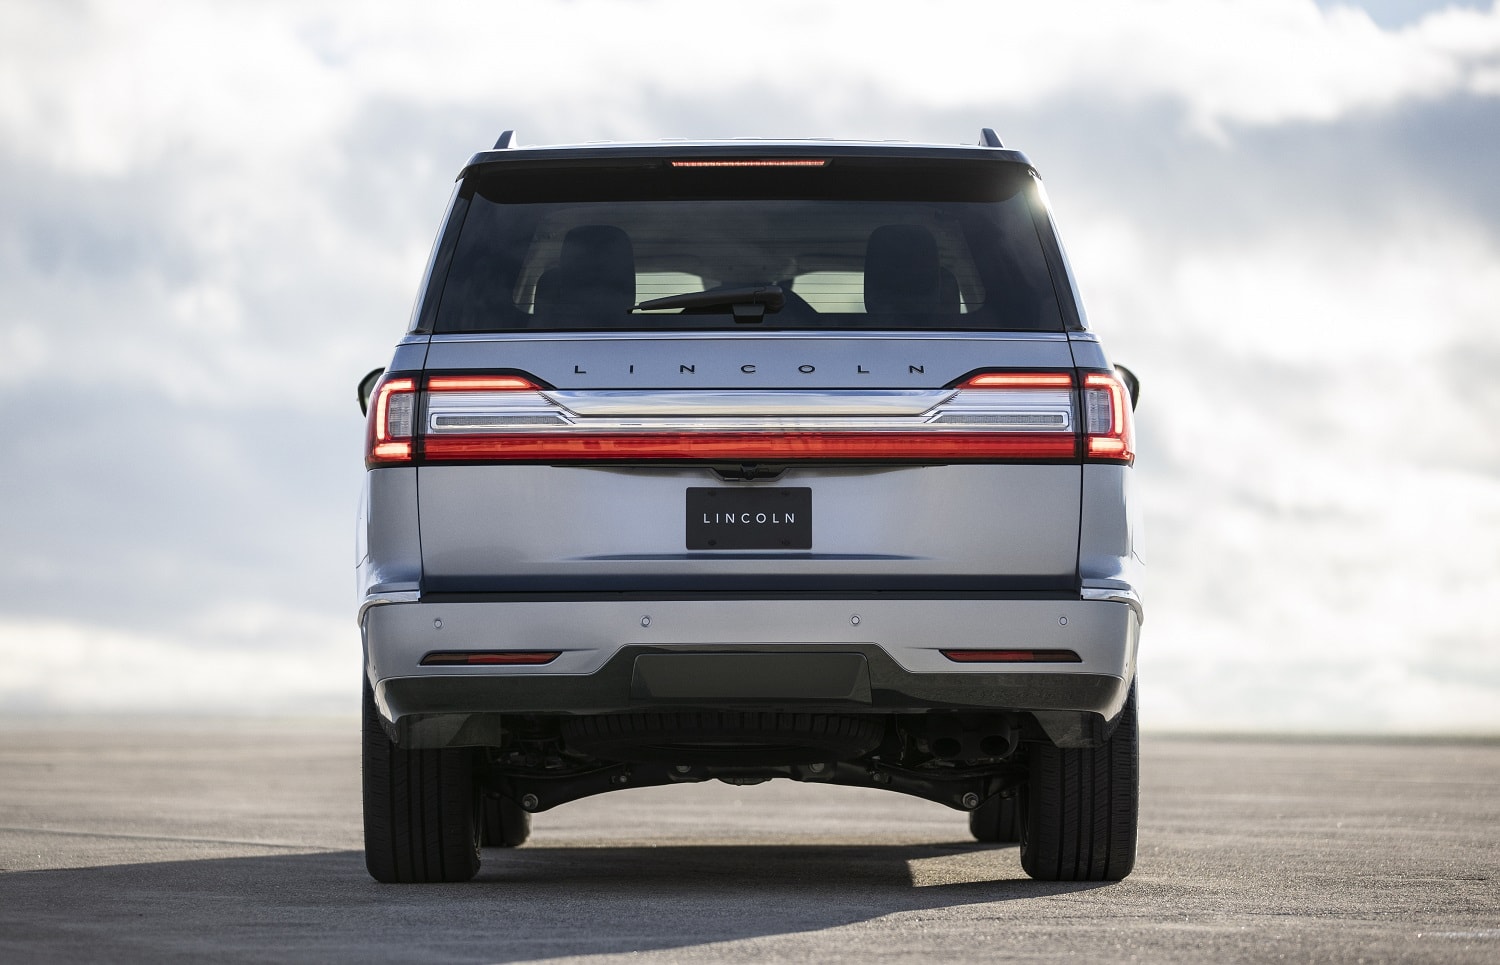 lincoln-navigator-incentive-offers-6-9-apr-in-december-2022